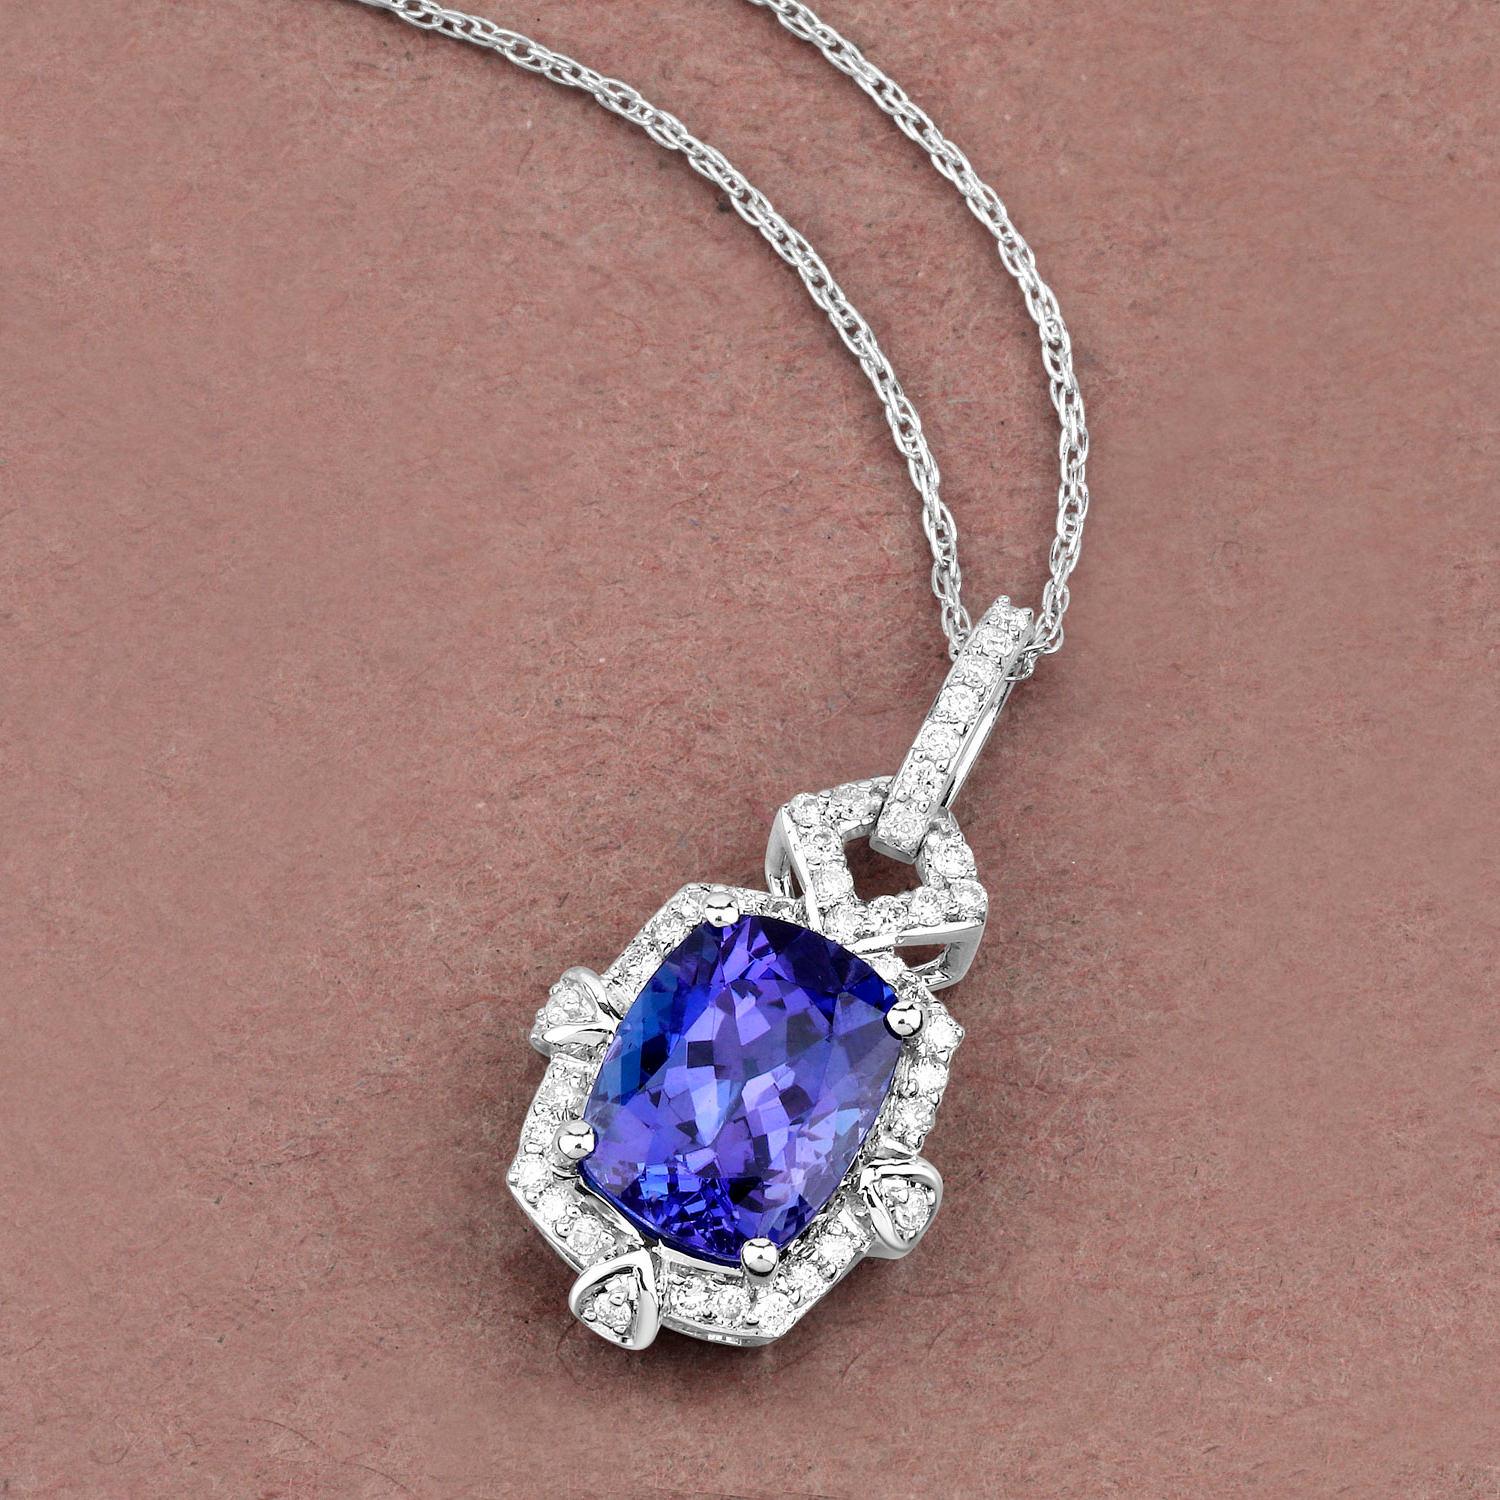 Radiant Cut Tanzanite Necklace With Diamonds 2.74 Carats 14K White Gold For Sale